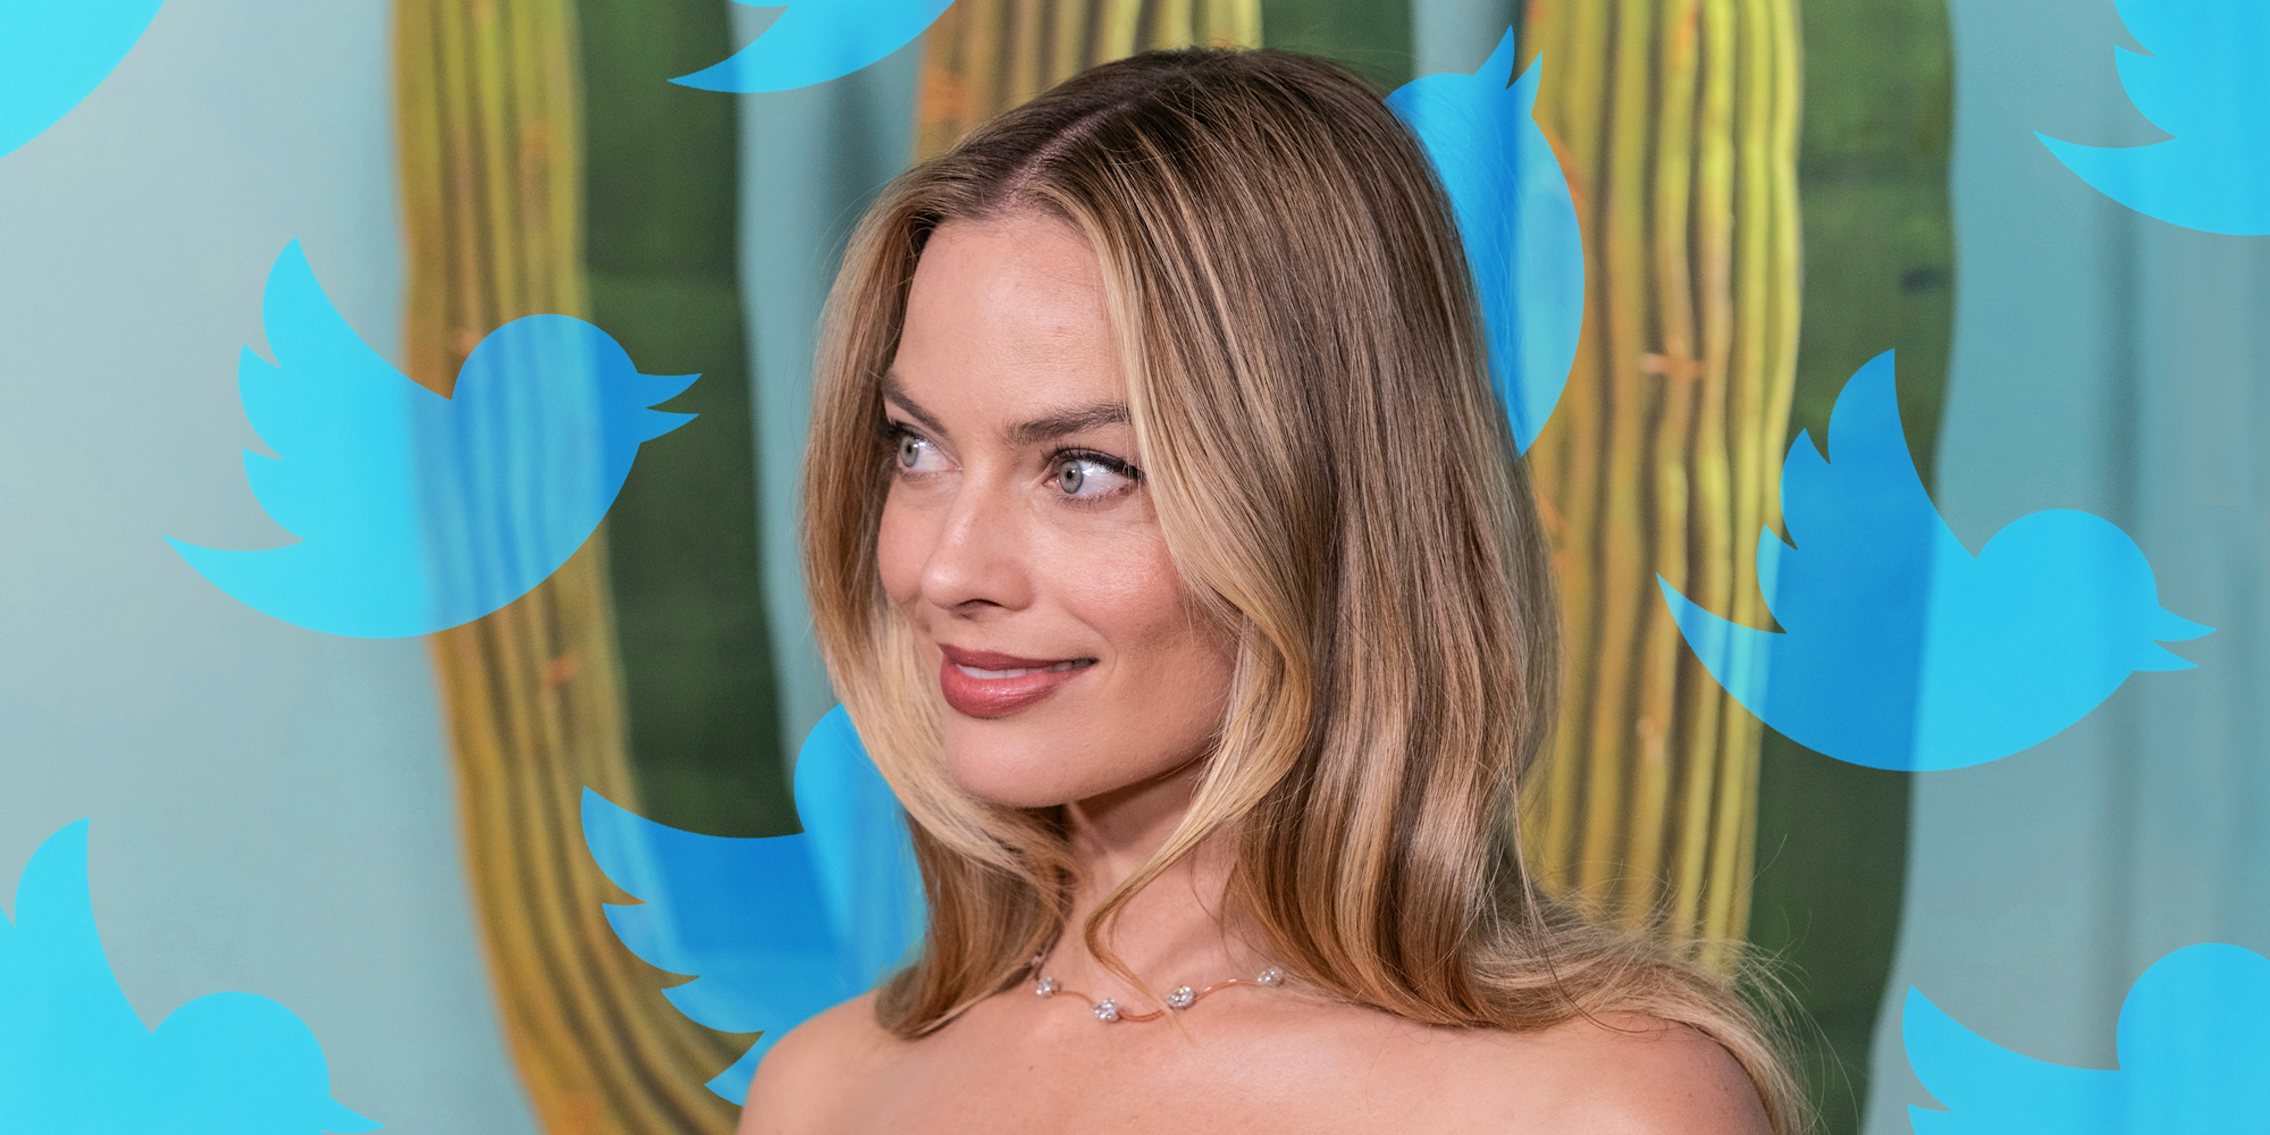 Margot Robbie in front of green and blue background with Twitter bird logos scattered